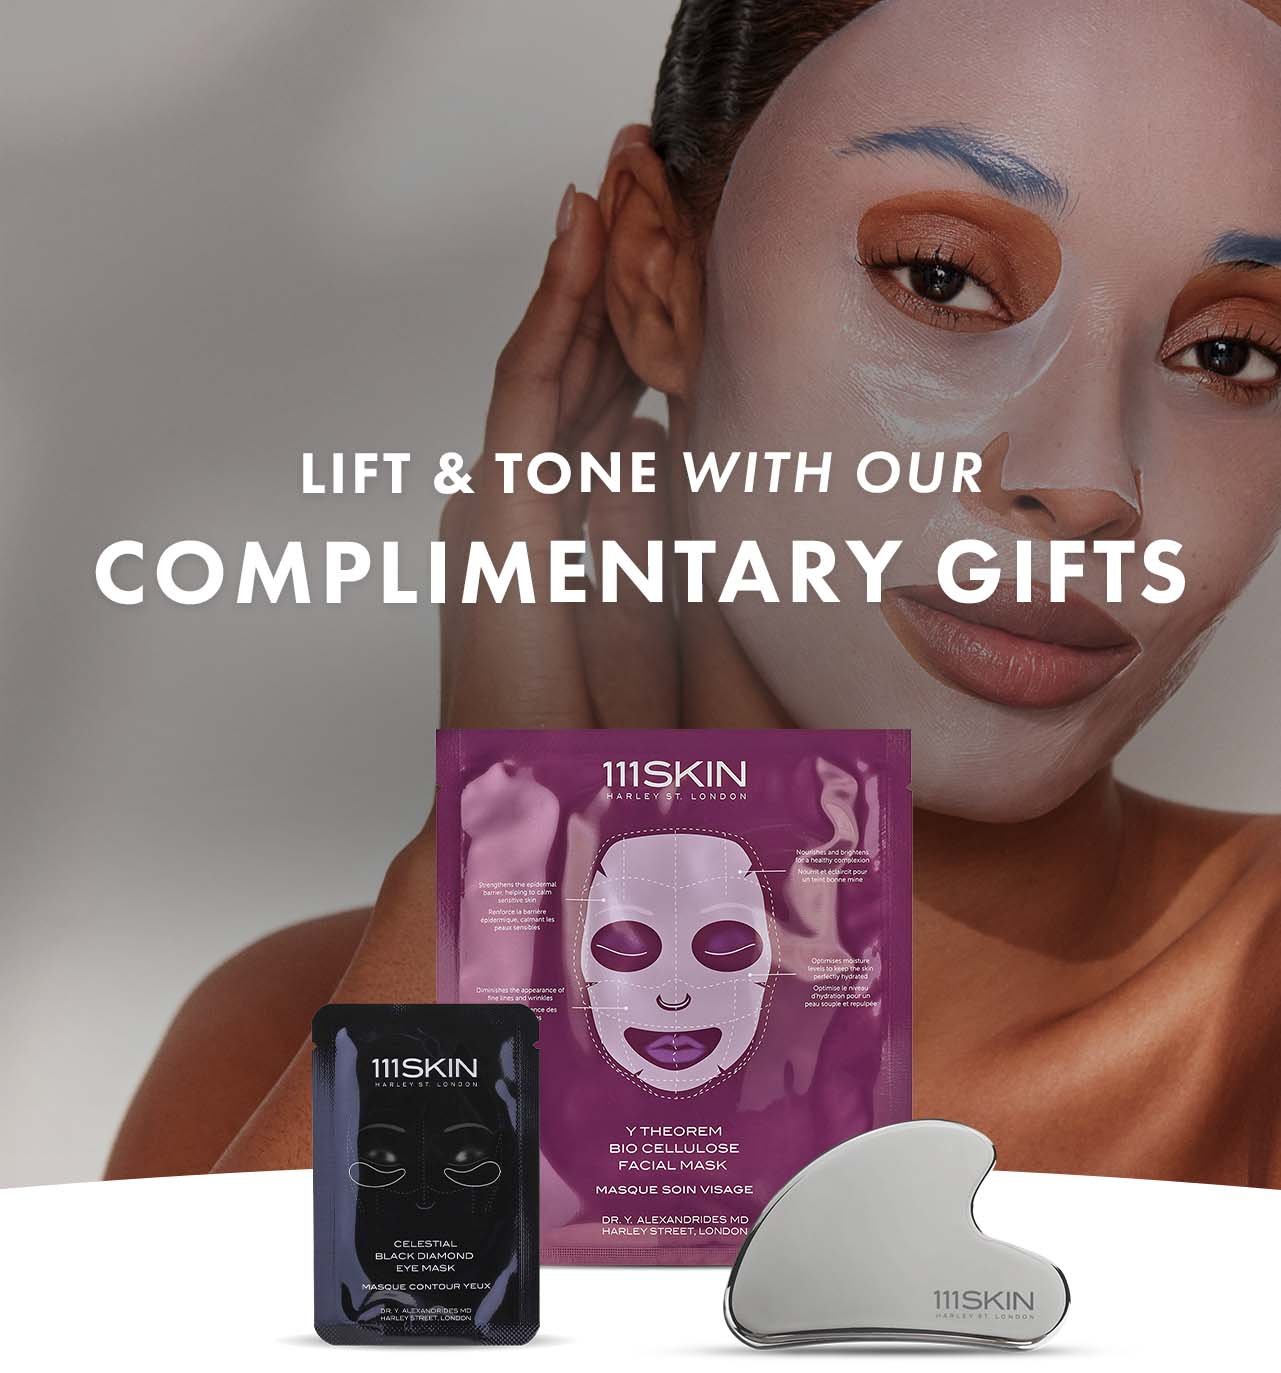 LIFT AND TONE WITH OUR COMPLIMENTARY GIFTS